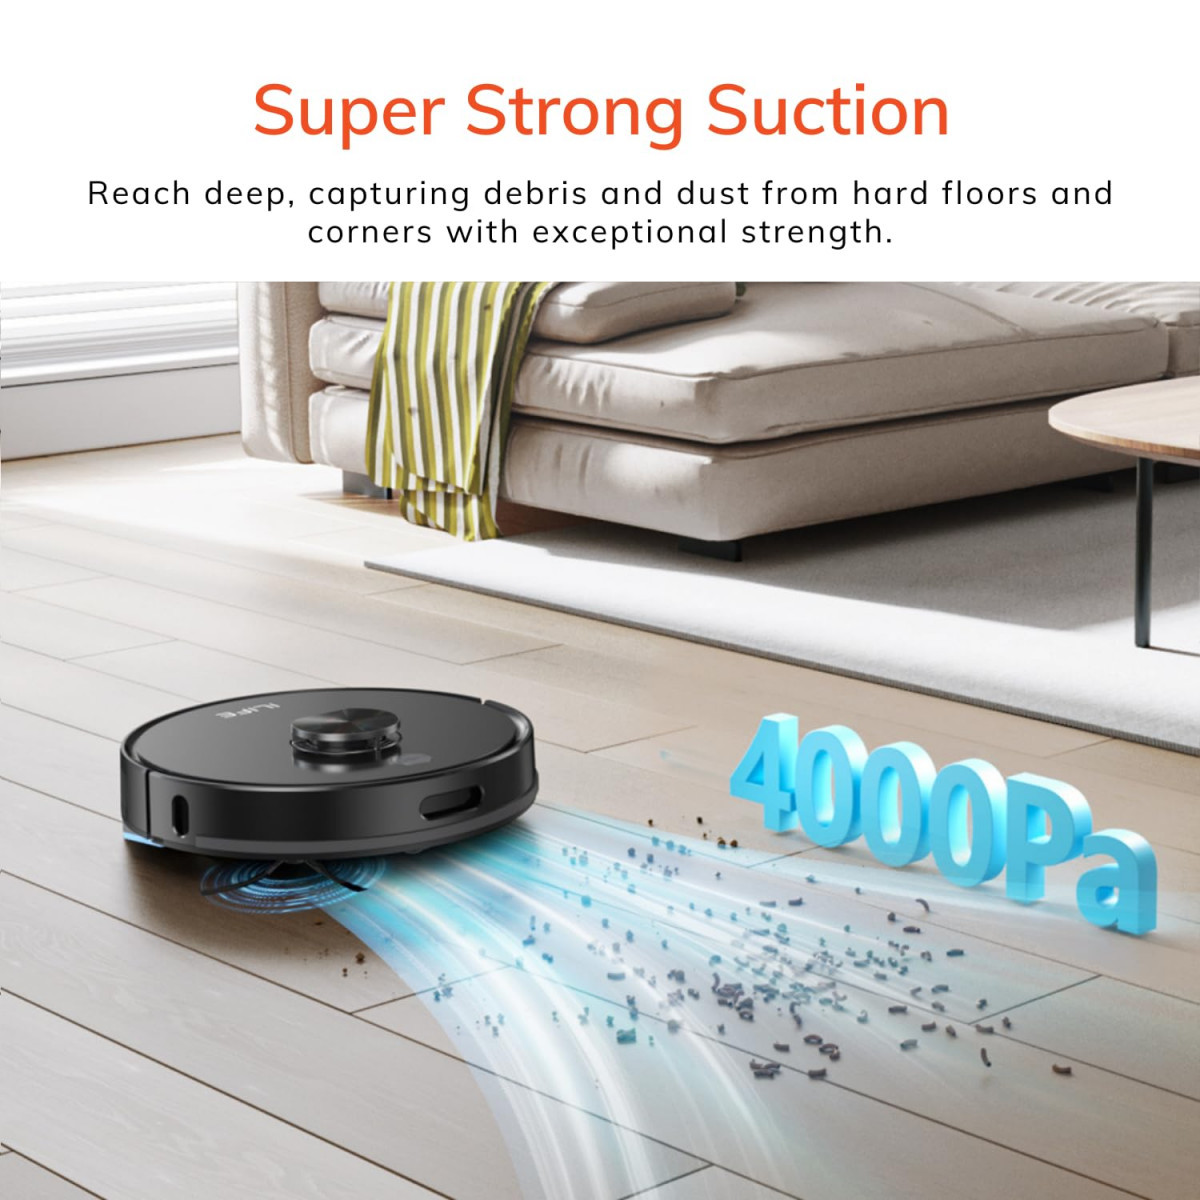 ILIFE A20 Robotic Vacuum Cleaner Lidar Navigation Powerful Suction Customized Schedule Cleaning Ideal for Hard Floor Low Pile Carpet Vacuum and Mop Wi-FiApp Alexa  GH Black